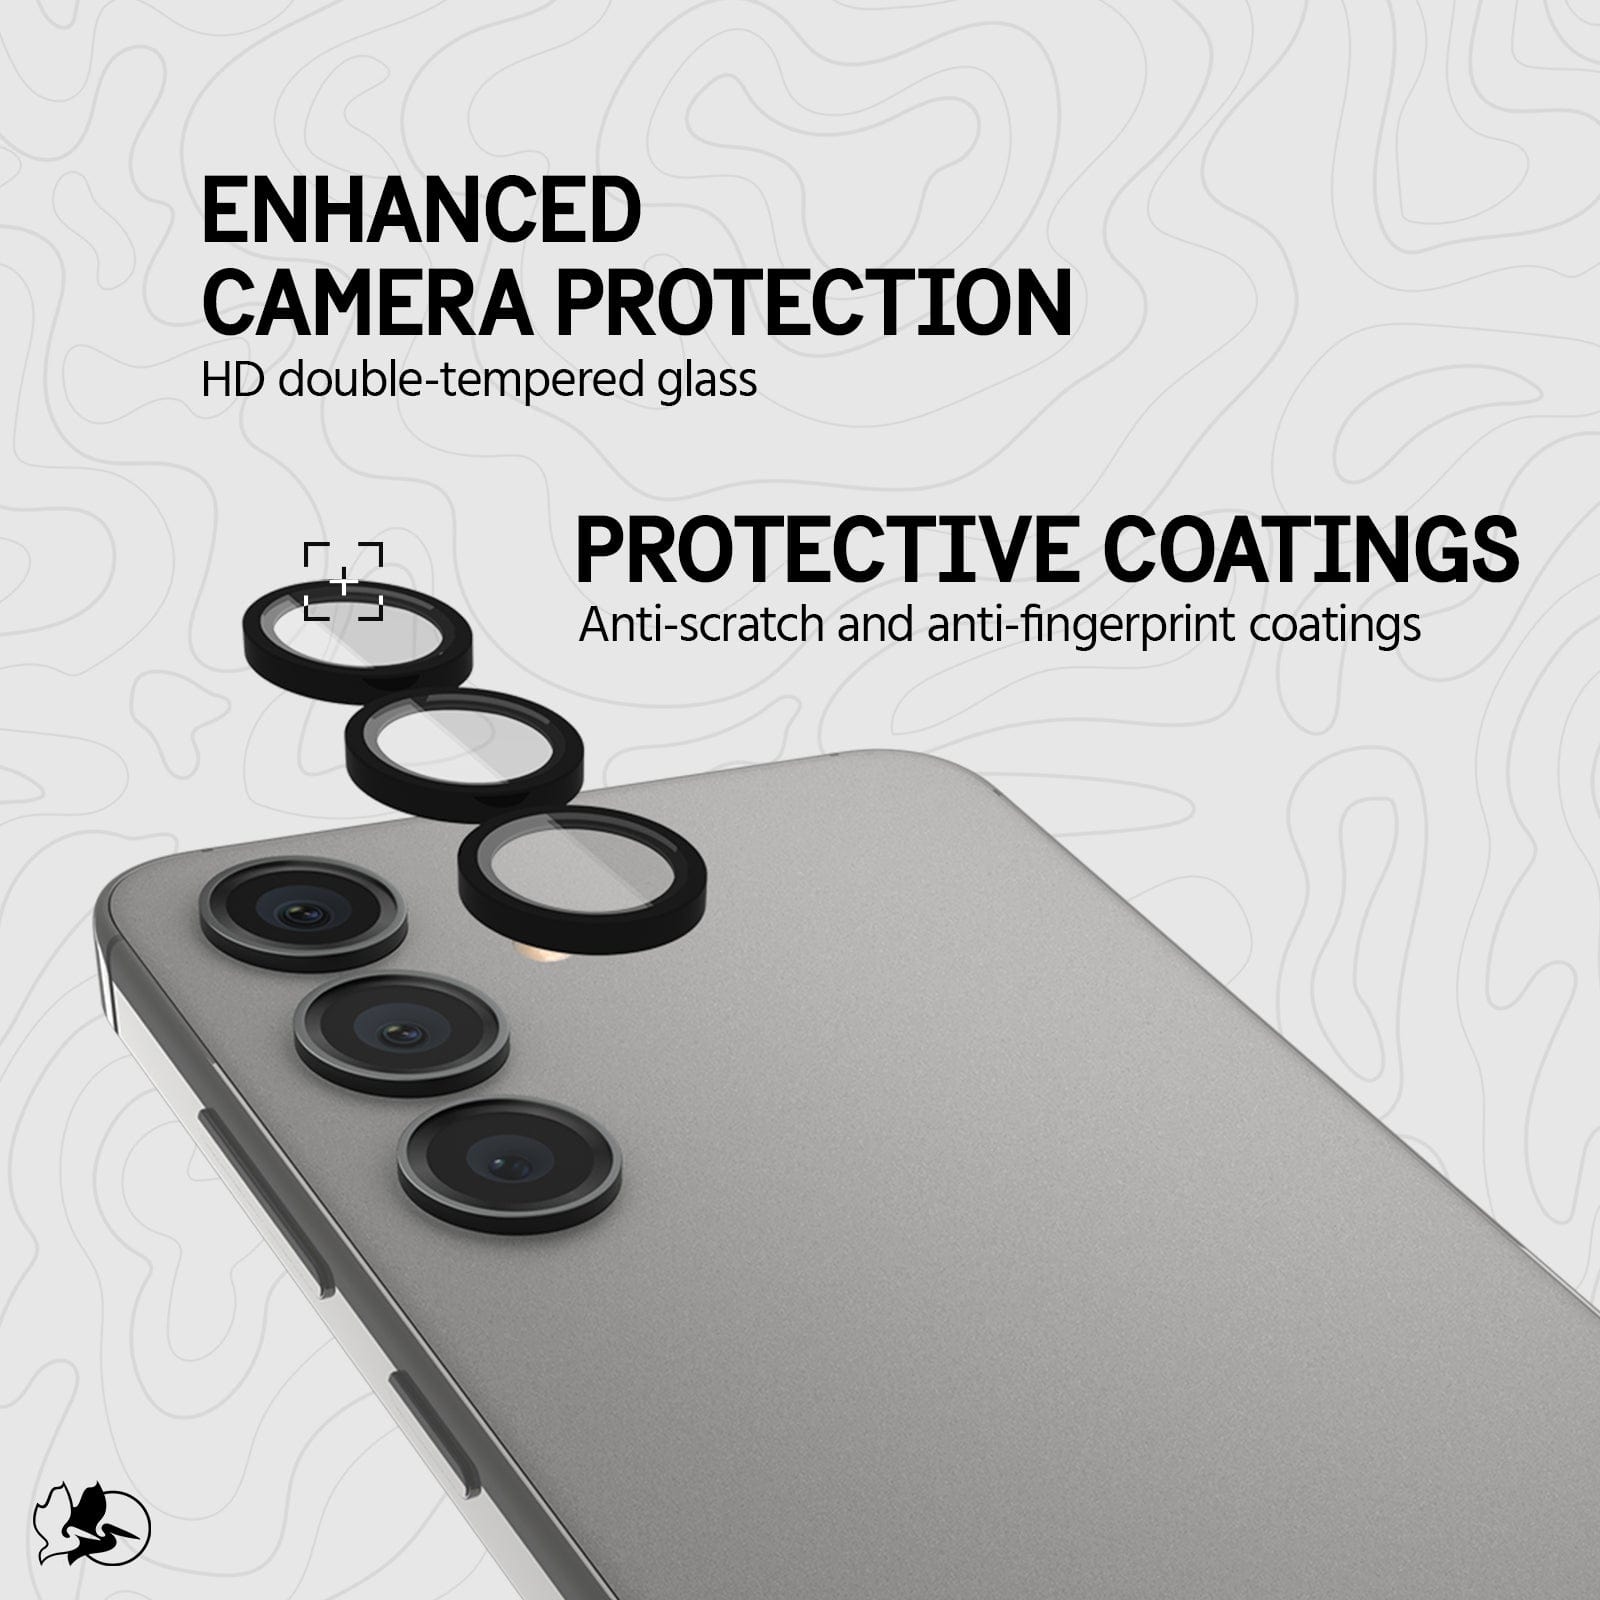 ENHANCED CAMERA PROTECTION HD DOUBLE-TEMPERED GLASS. PROTECTIVE COATINGS ANTI-SCRATCH AND ANTI-FINGERPRINT COATINGS